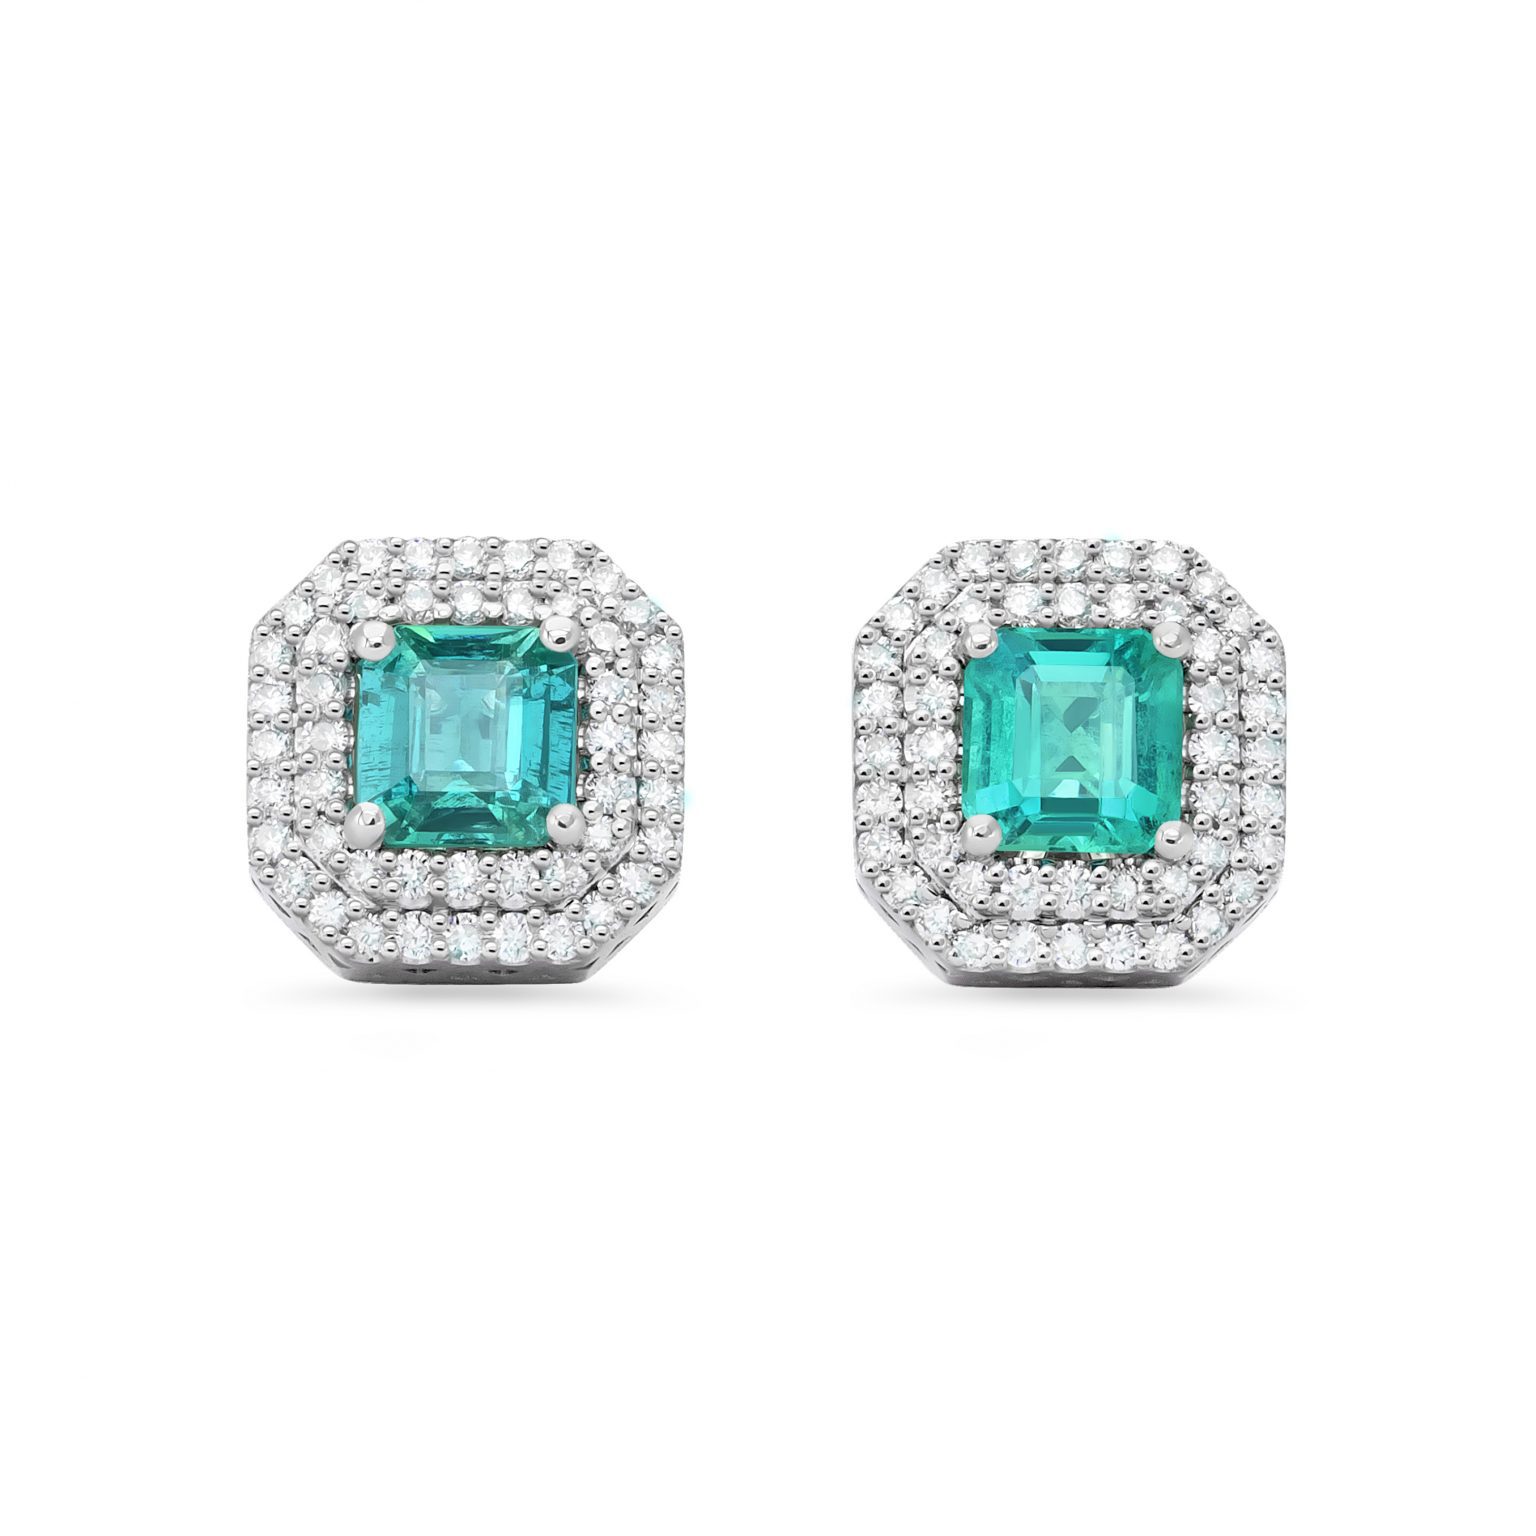 Emerald stud earrings with a total weight of 1.81 ct